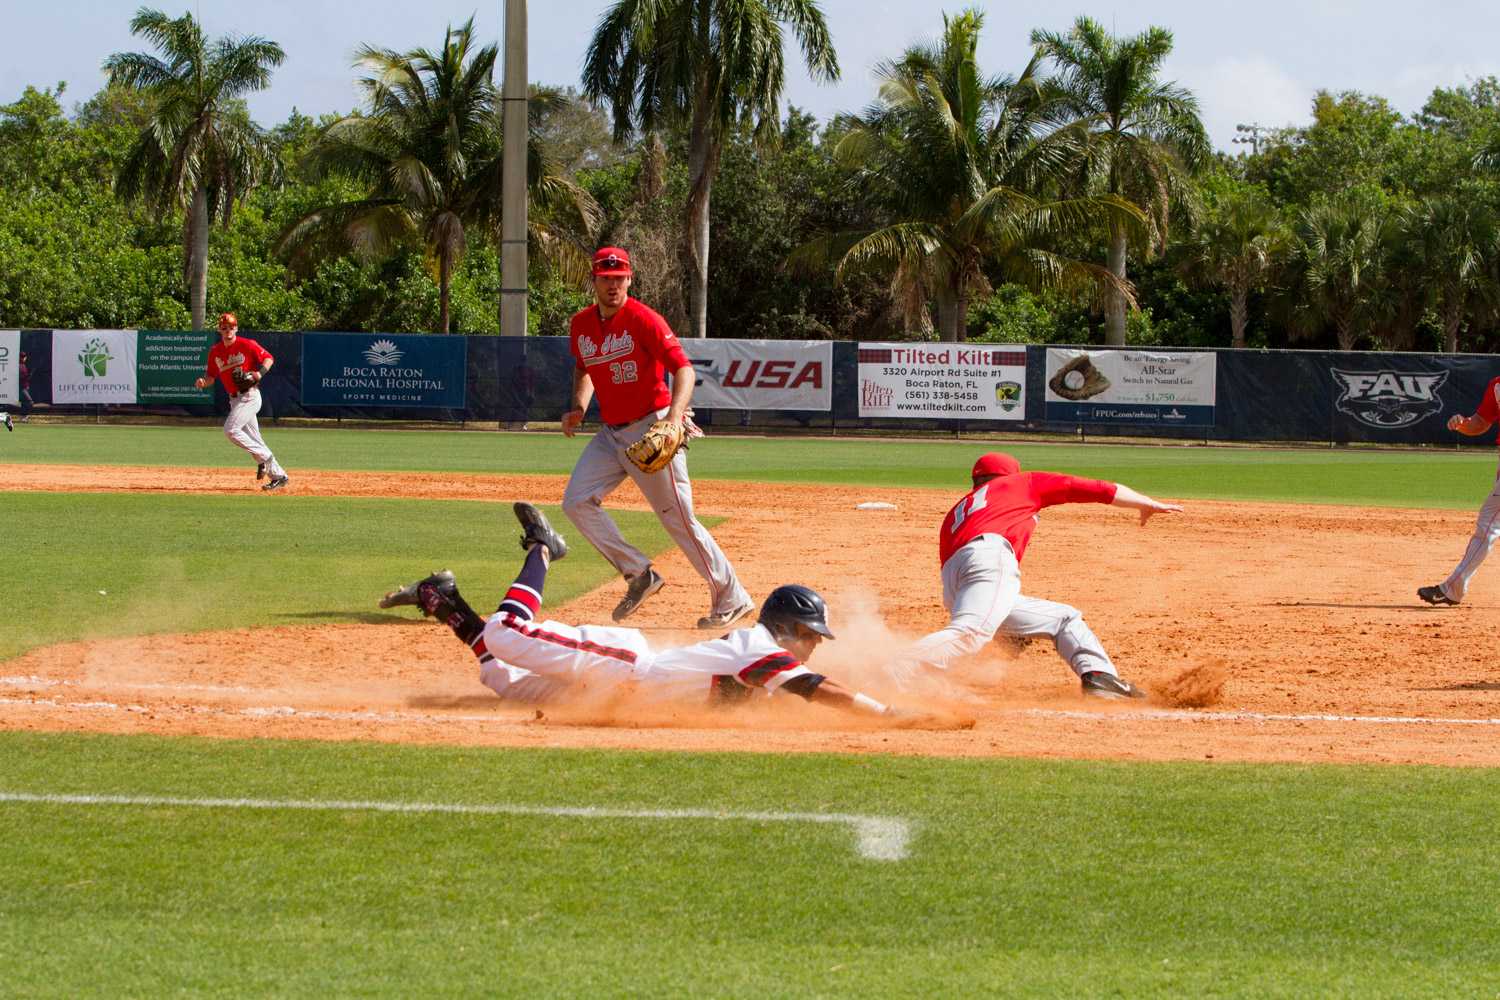 Sophomore Stephen Kerr (6) slides into first safely after an Ohio State error.